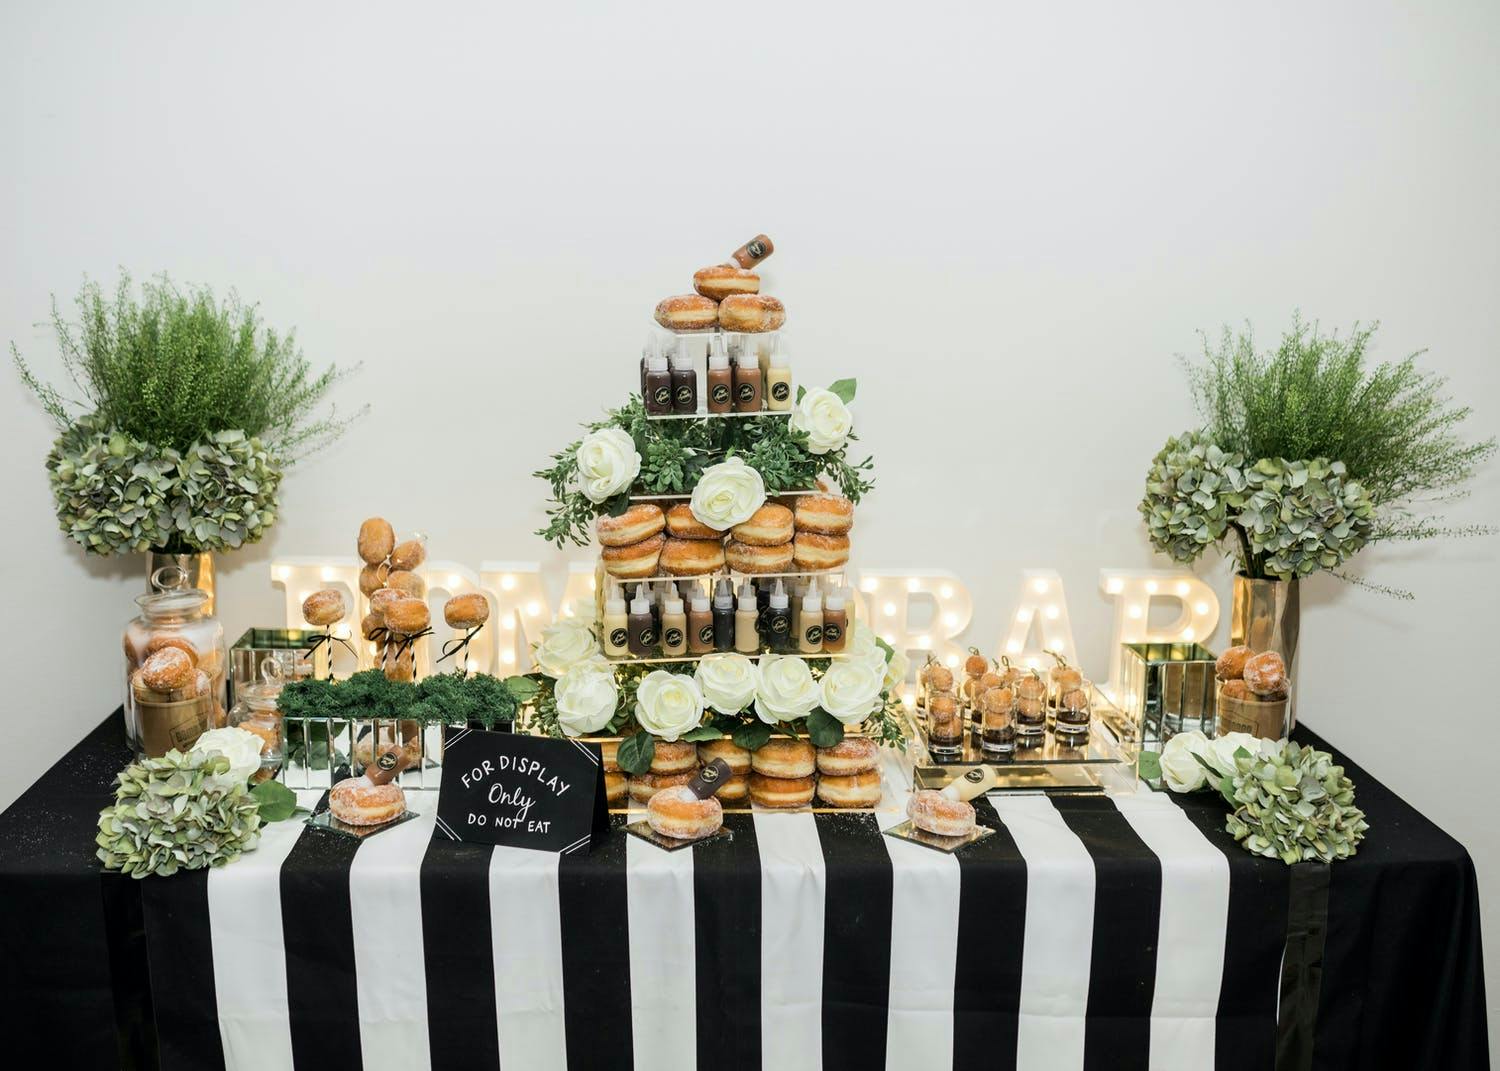 Wedding Donut Display With Black and White Striped Linen | PartySlate